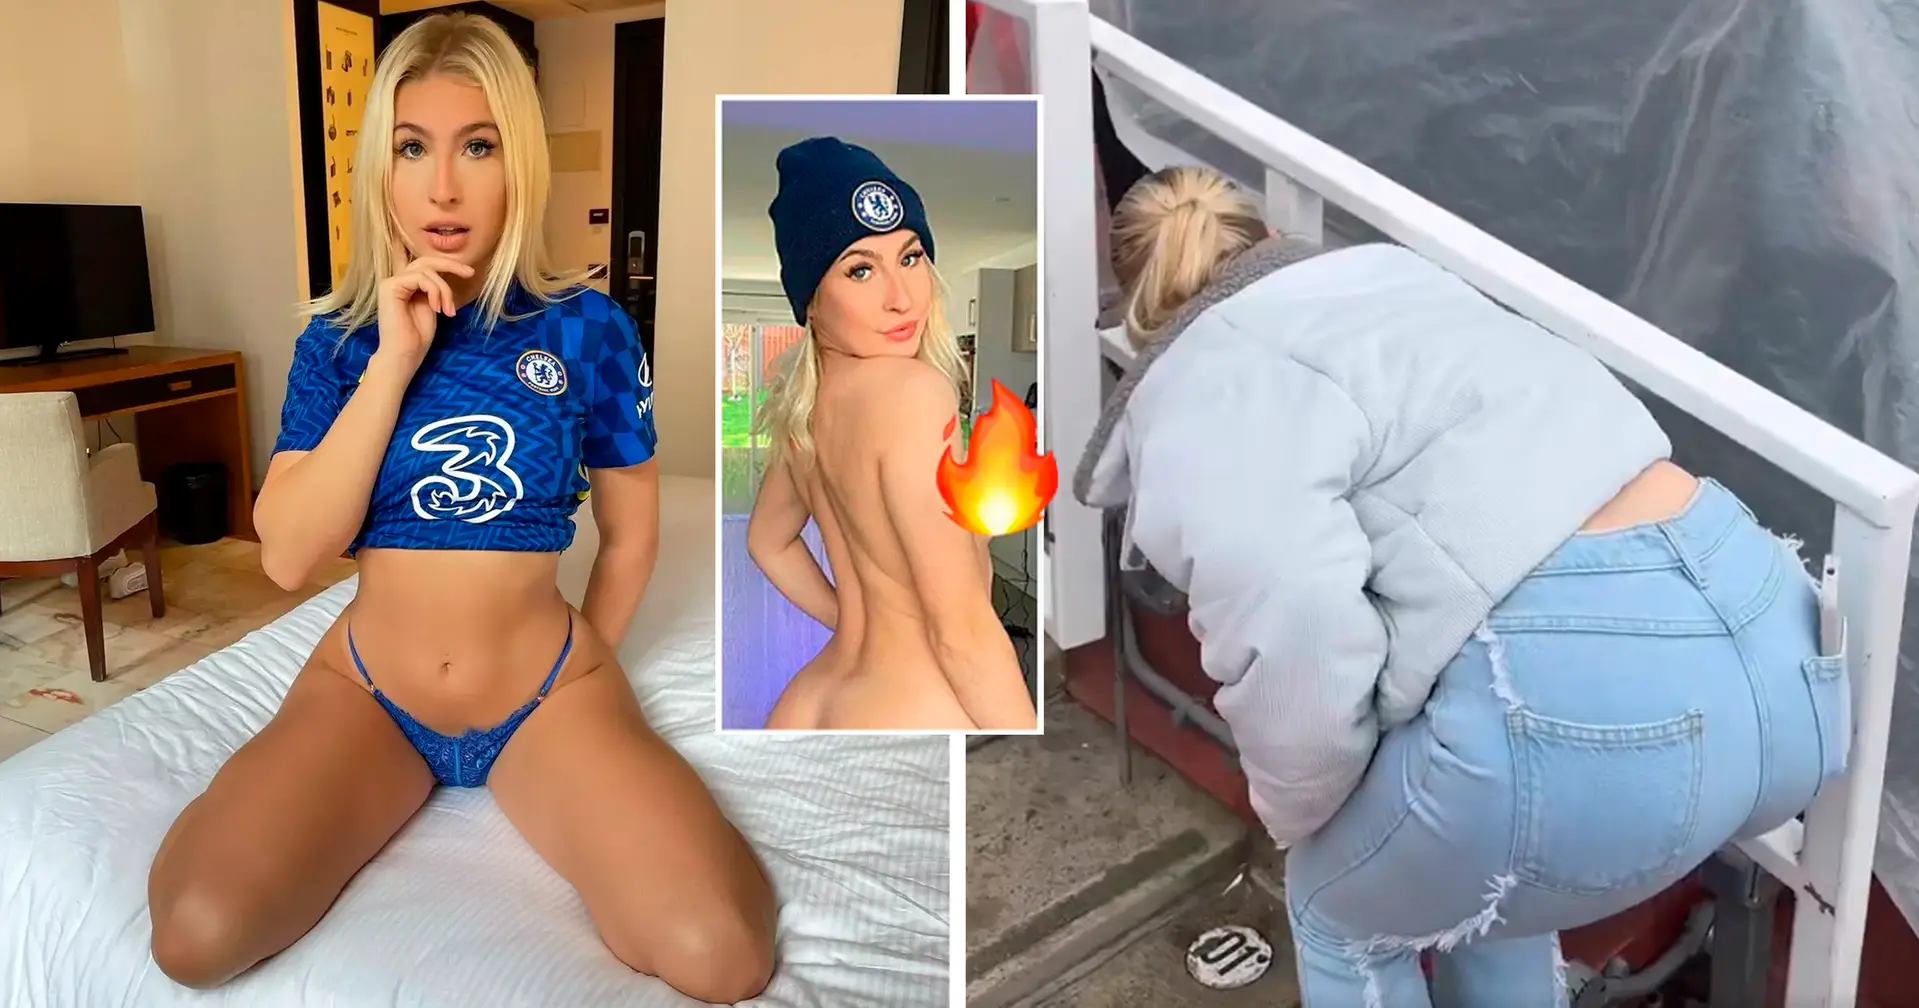 Squirt champion Astrid Wett leaves an nasty surprise for Arteta - it didn't help Chelsea avoid a thrashing in the derby